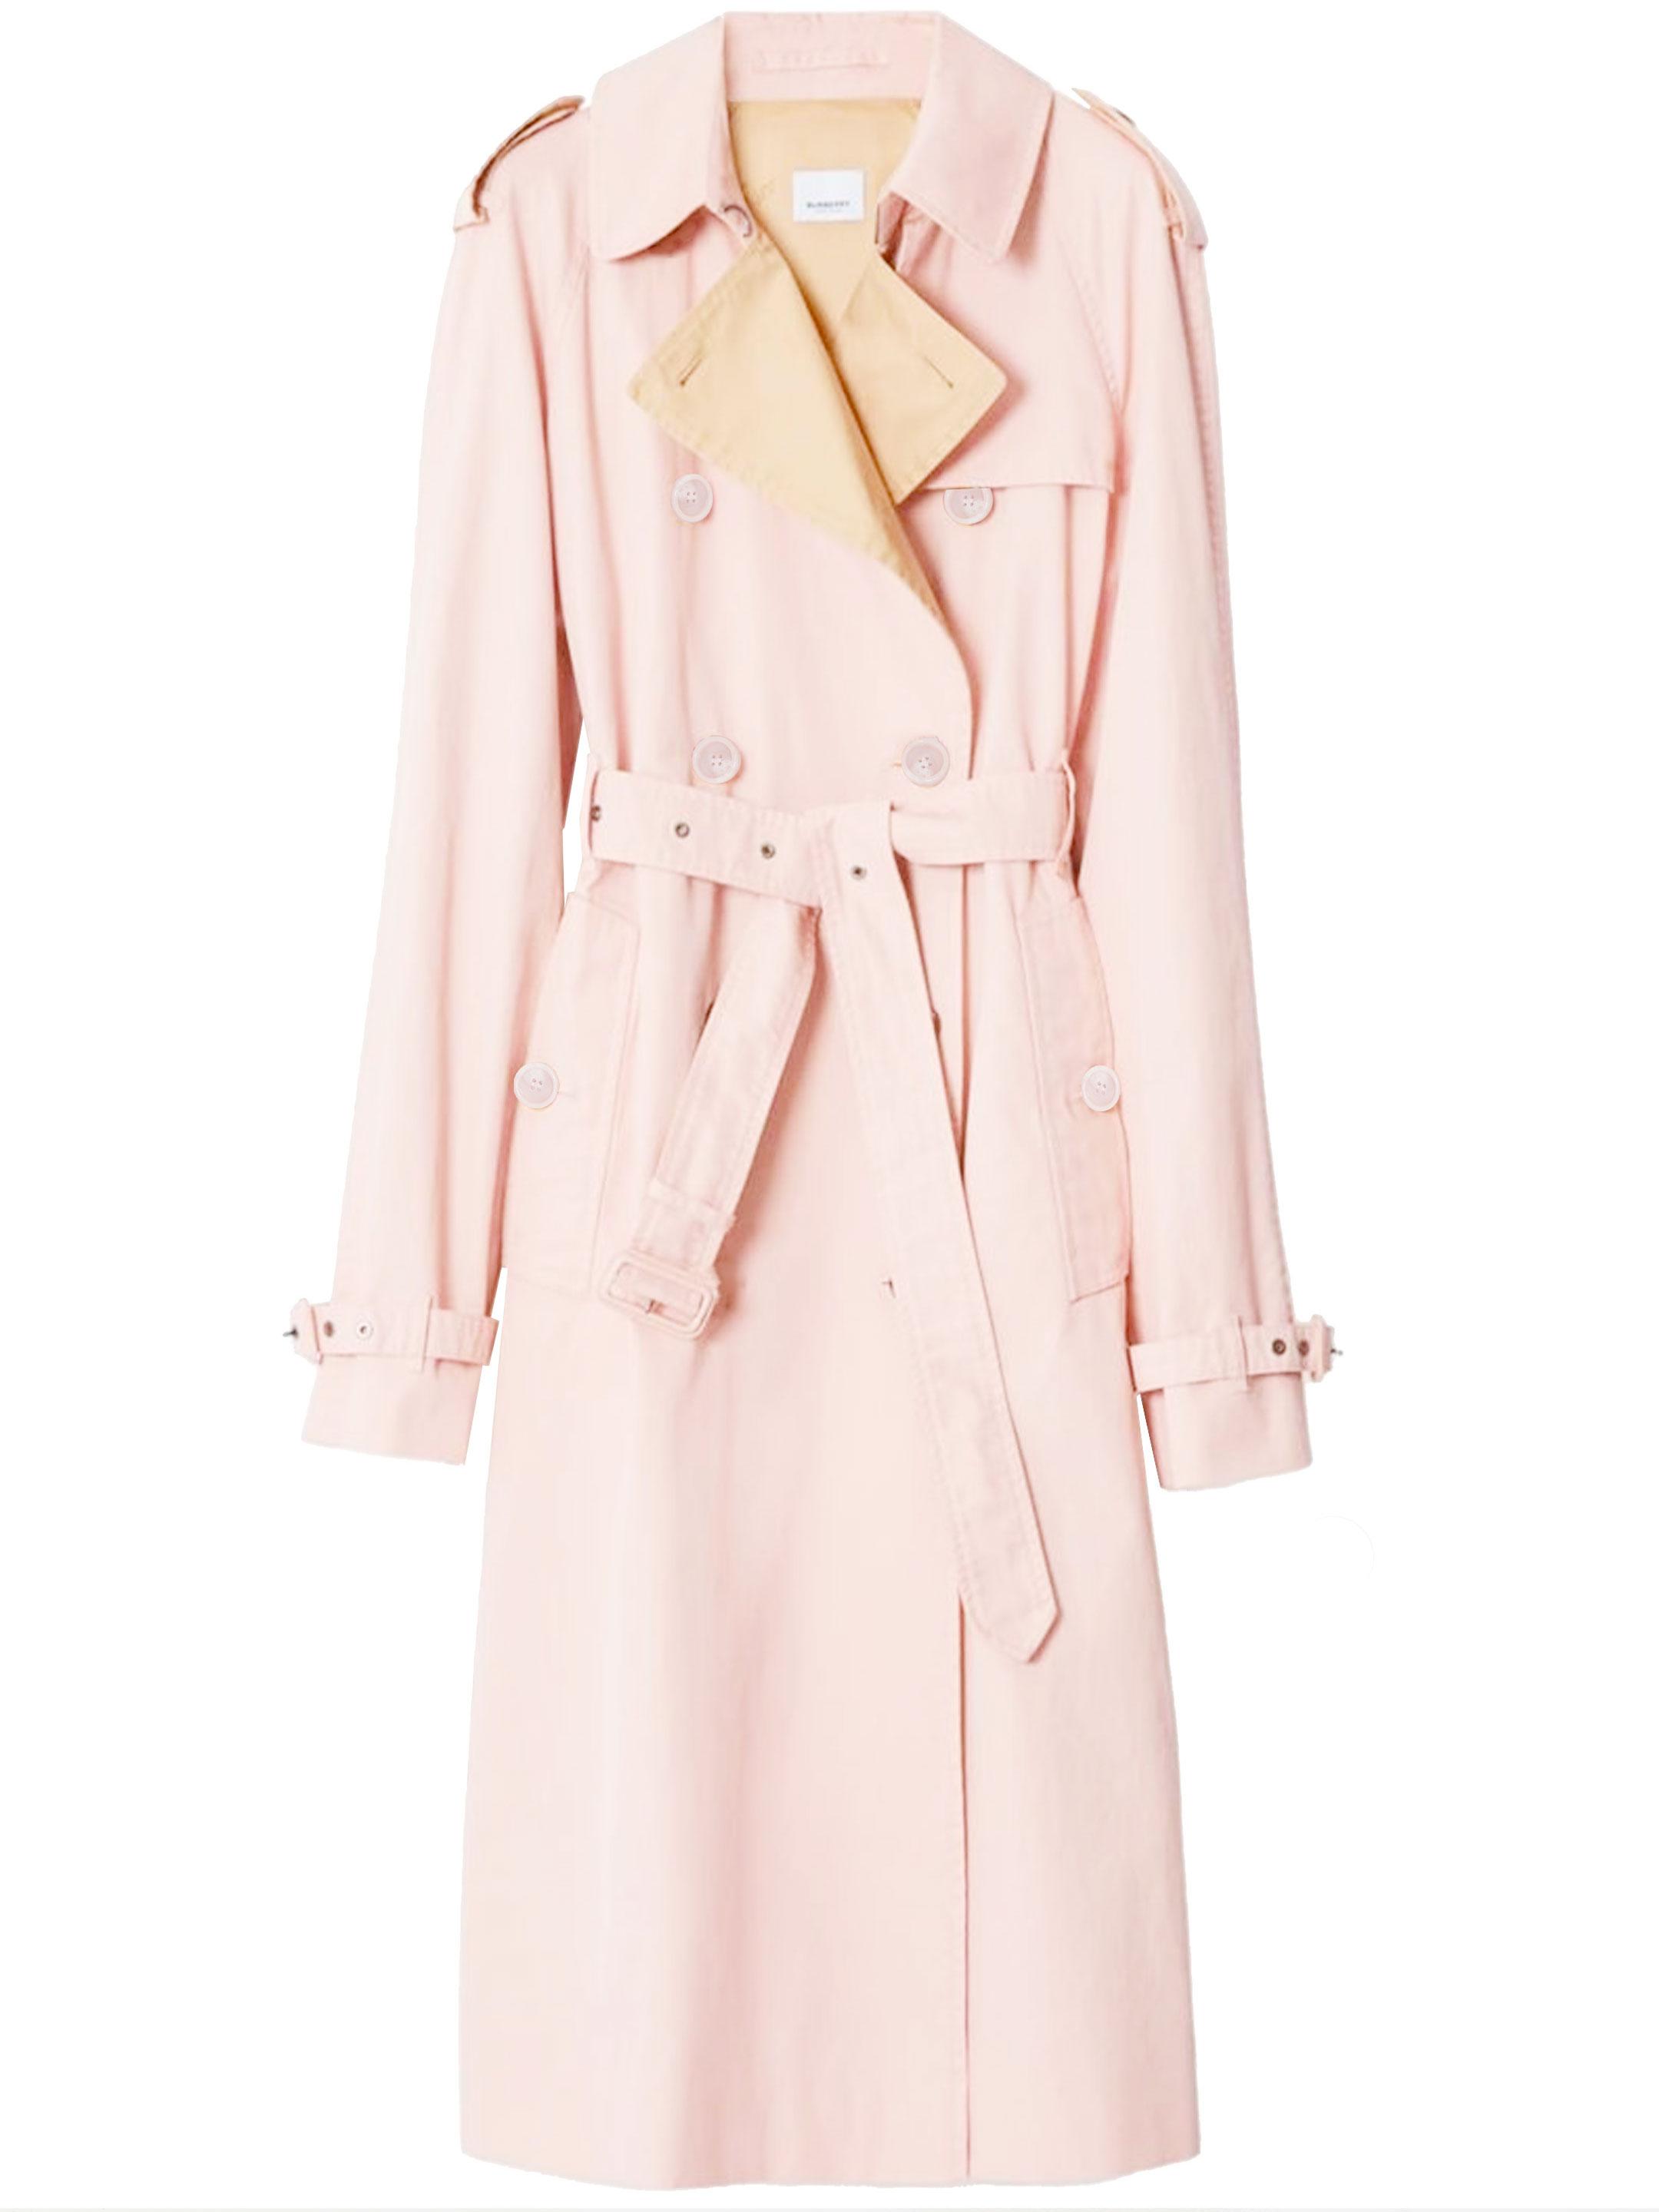 Burberry Cotton Gabardine Trench Coat in Pink | Lyst